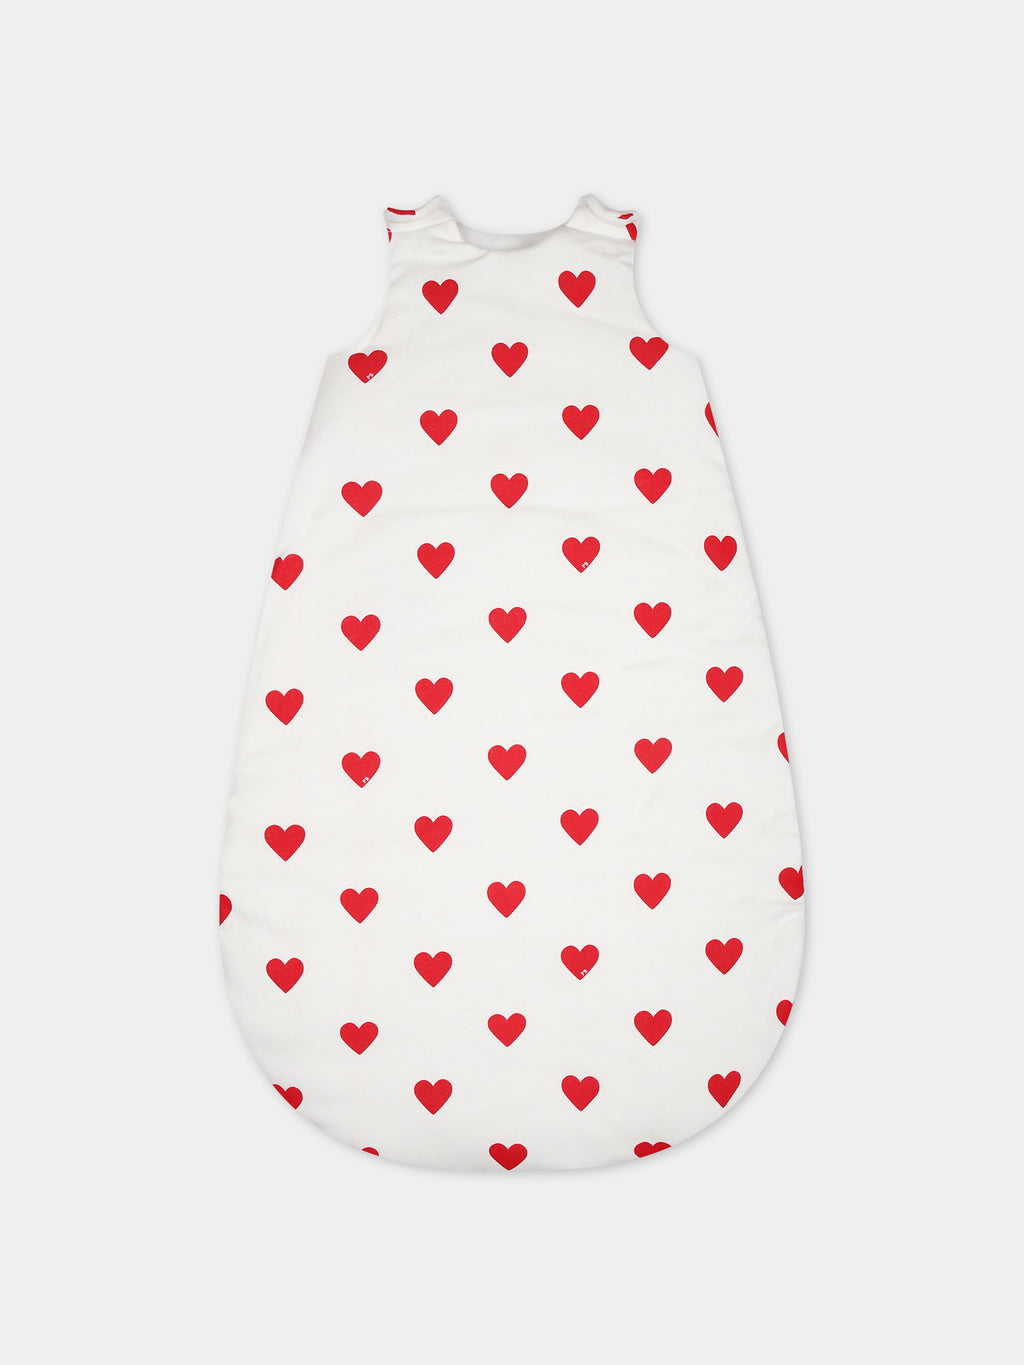 White sleeping bag for baby girl with hearts